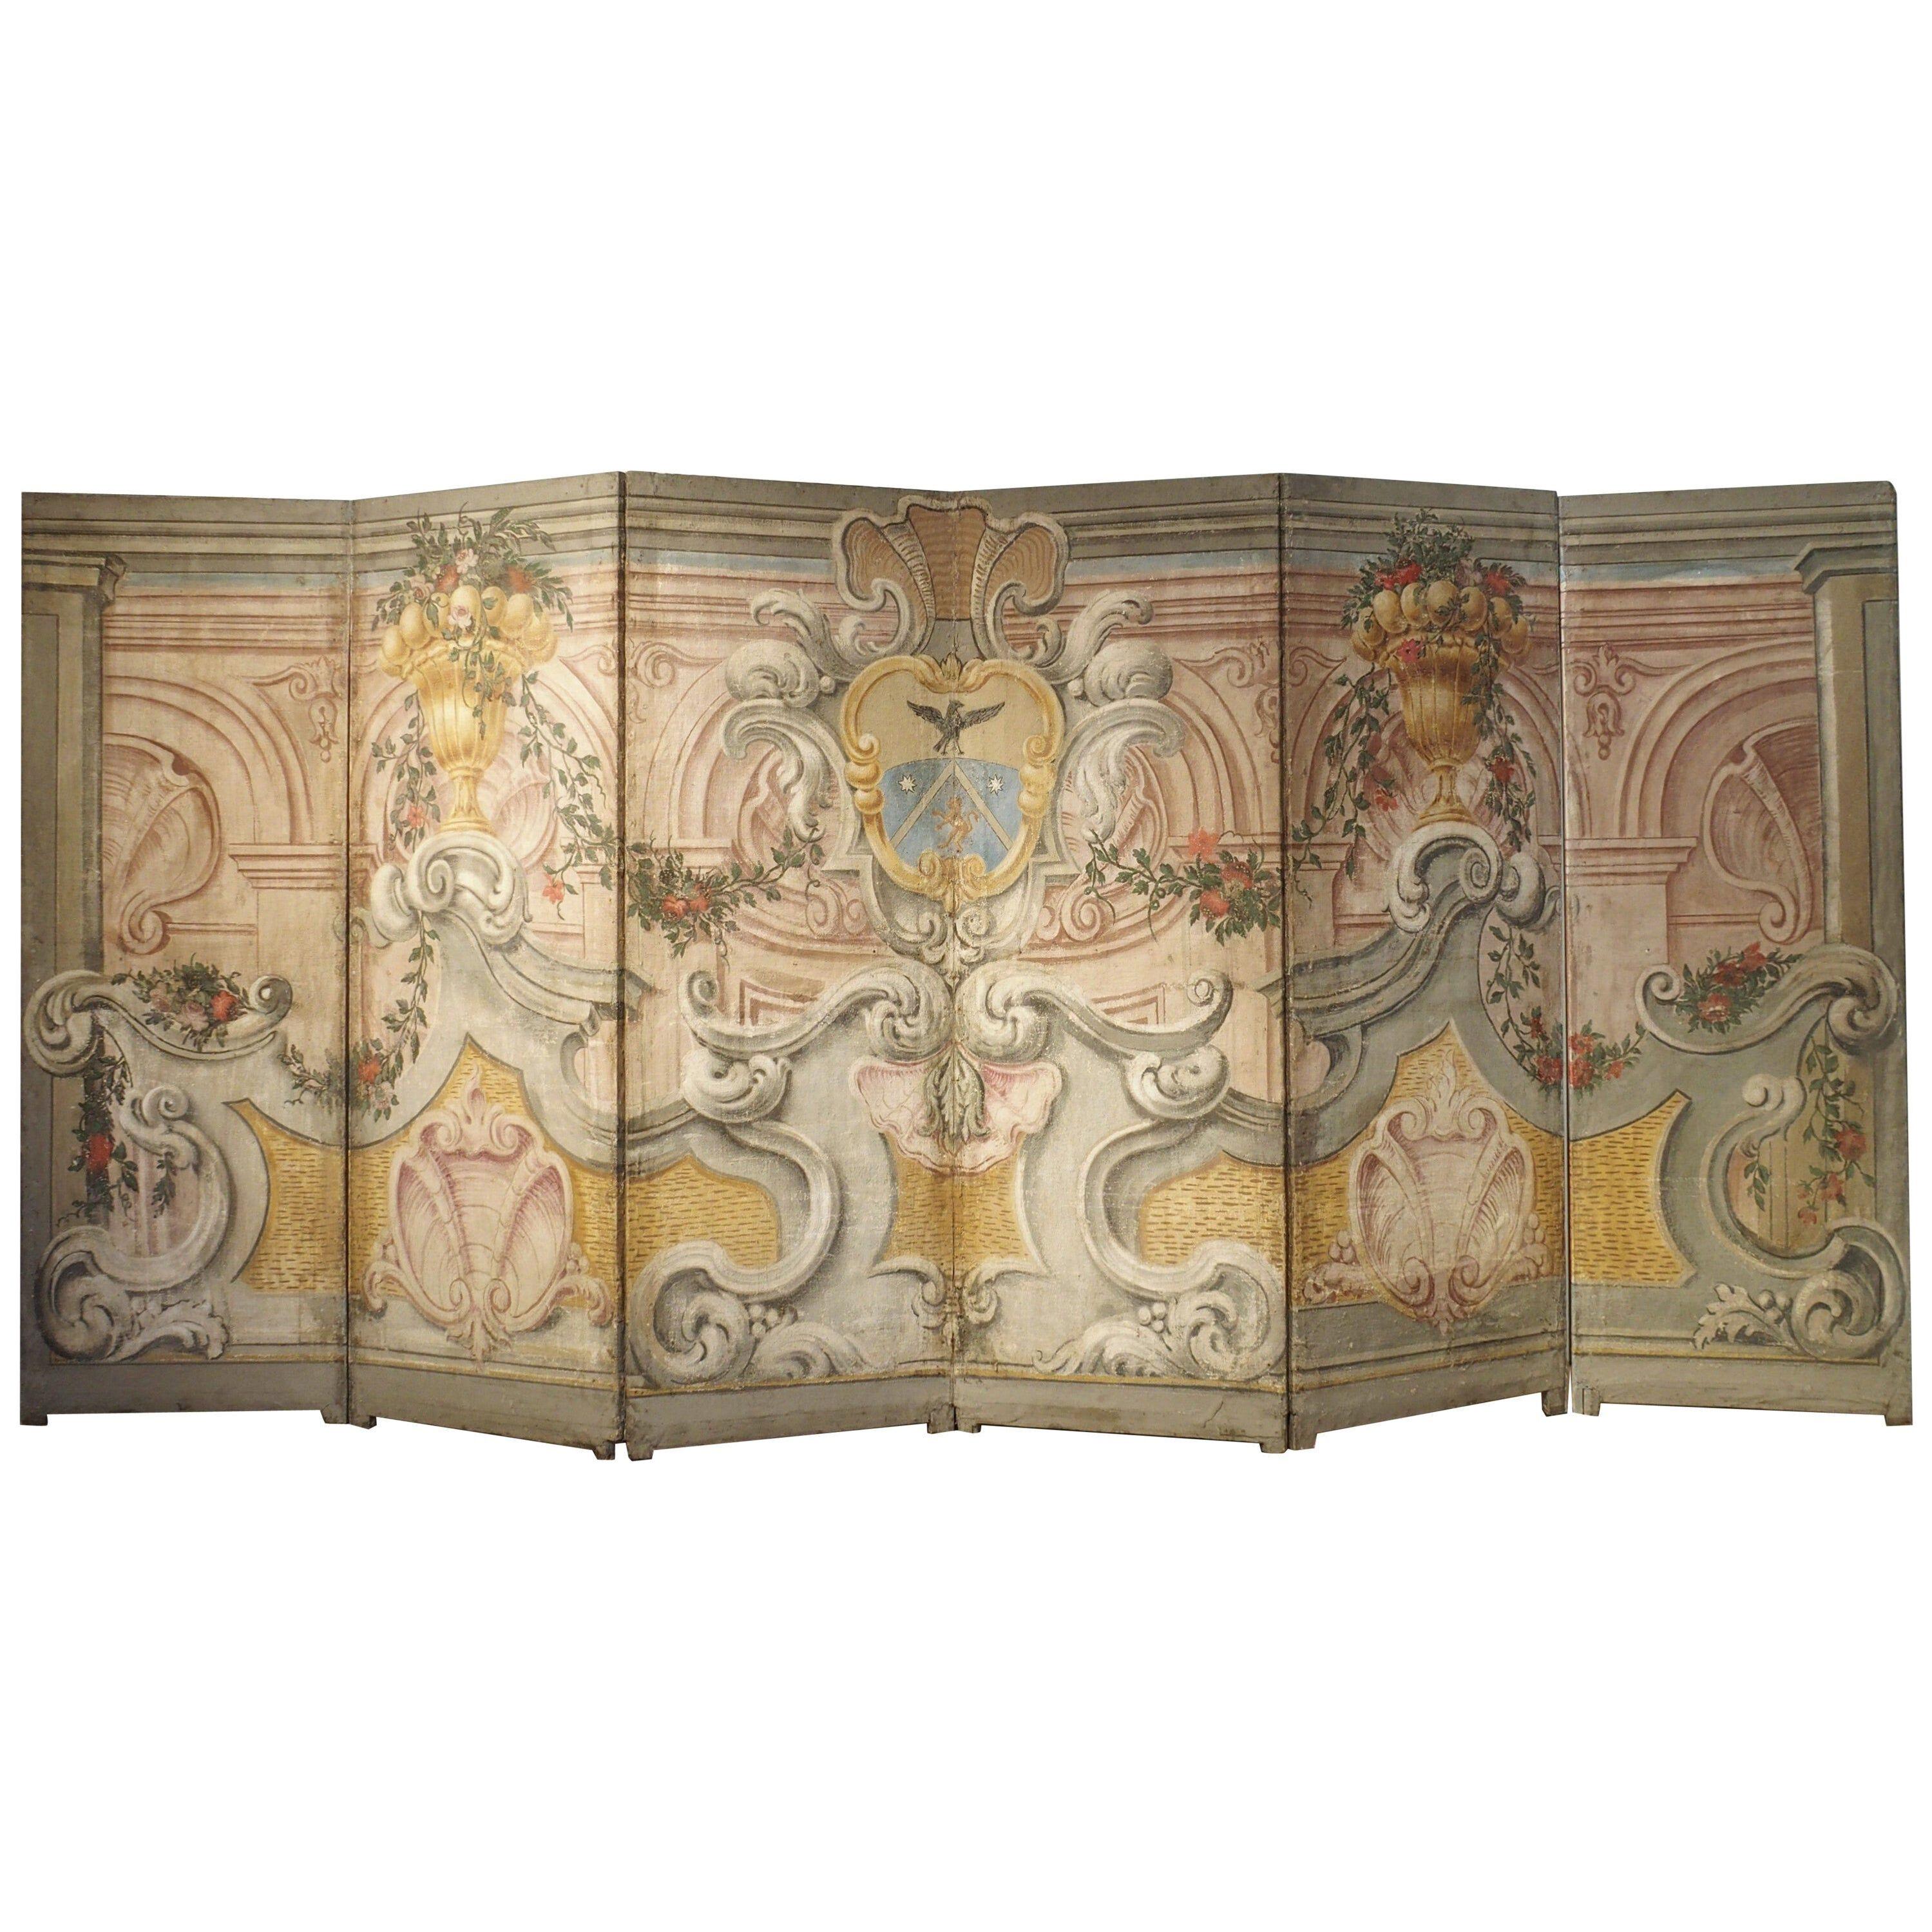 Spectacular Painted Six-Panel Armorial Baroque Screen from Italy, Circa 1700